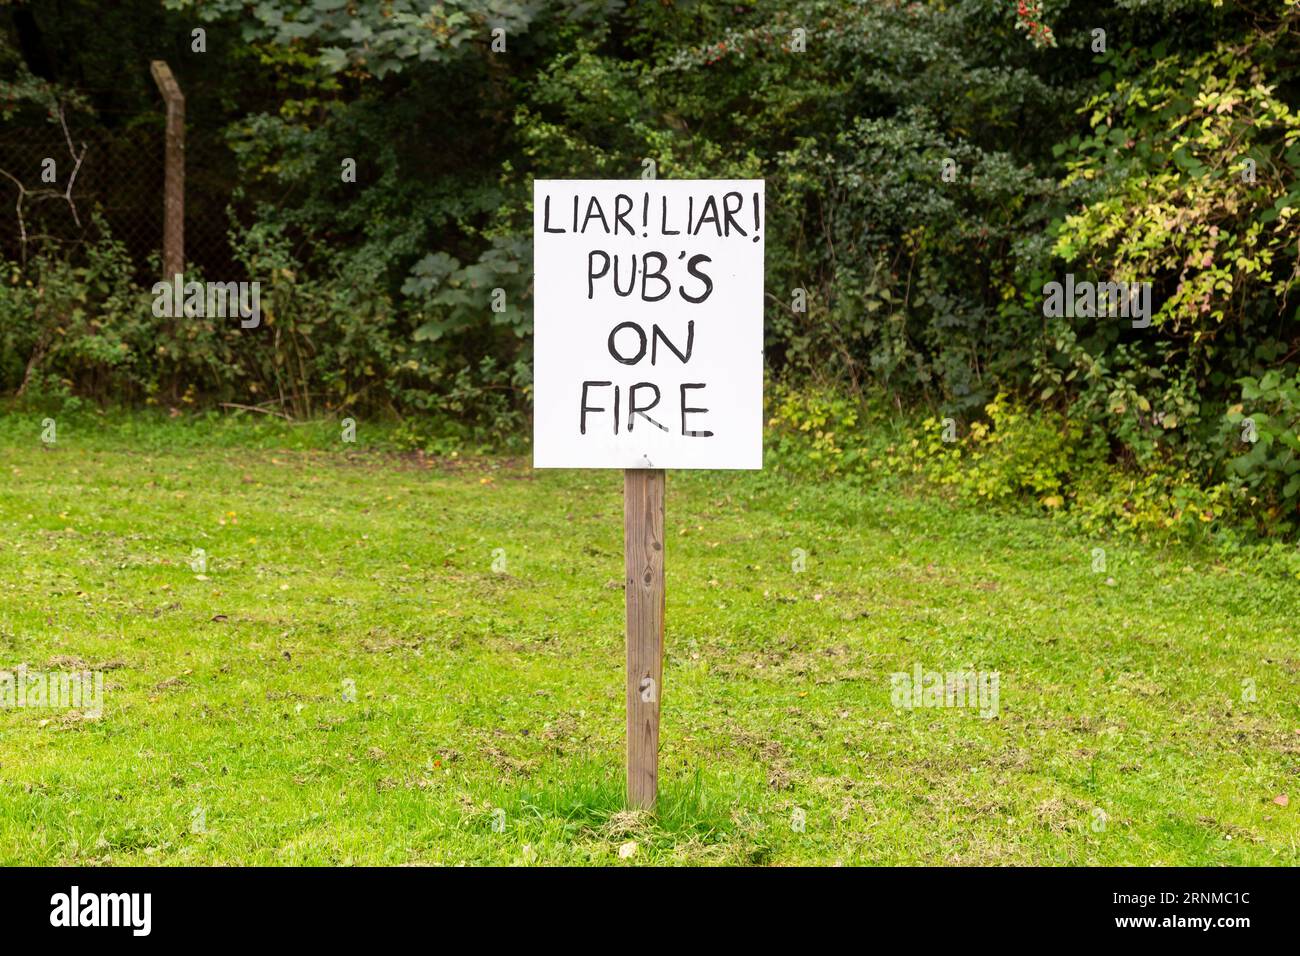 Himley, Staffordshire, UK. 2nd Sep, 2023. Four weeks after the famous Crooked House pub burned down, protest signs and the Black Country's flag are displayed in support of re-building the landmark building in the same location. A sign reads Liar! Liar! Pub's on Fire. Credit: Peter Lopeman/Alamy Live News Stock Photo